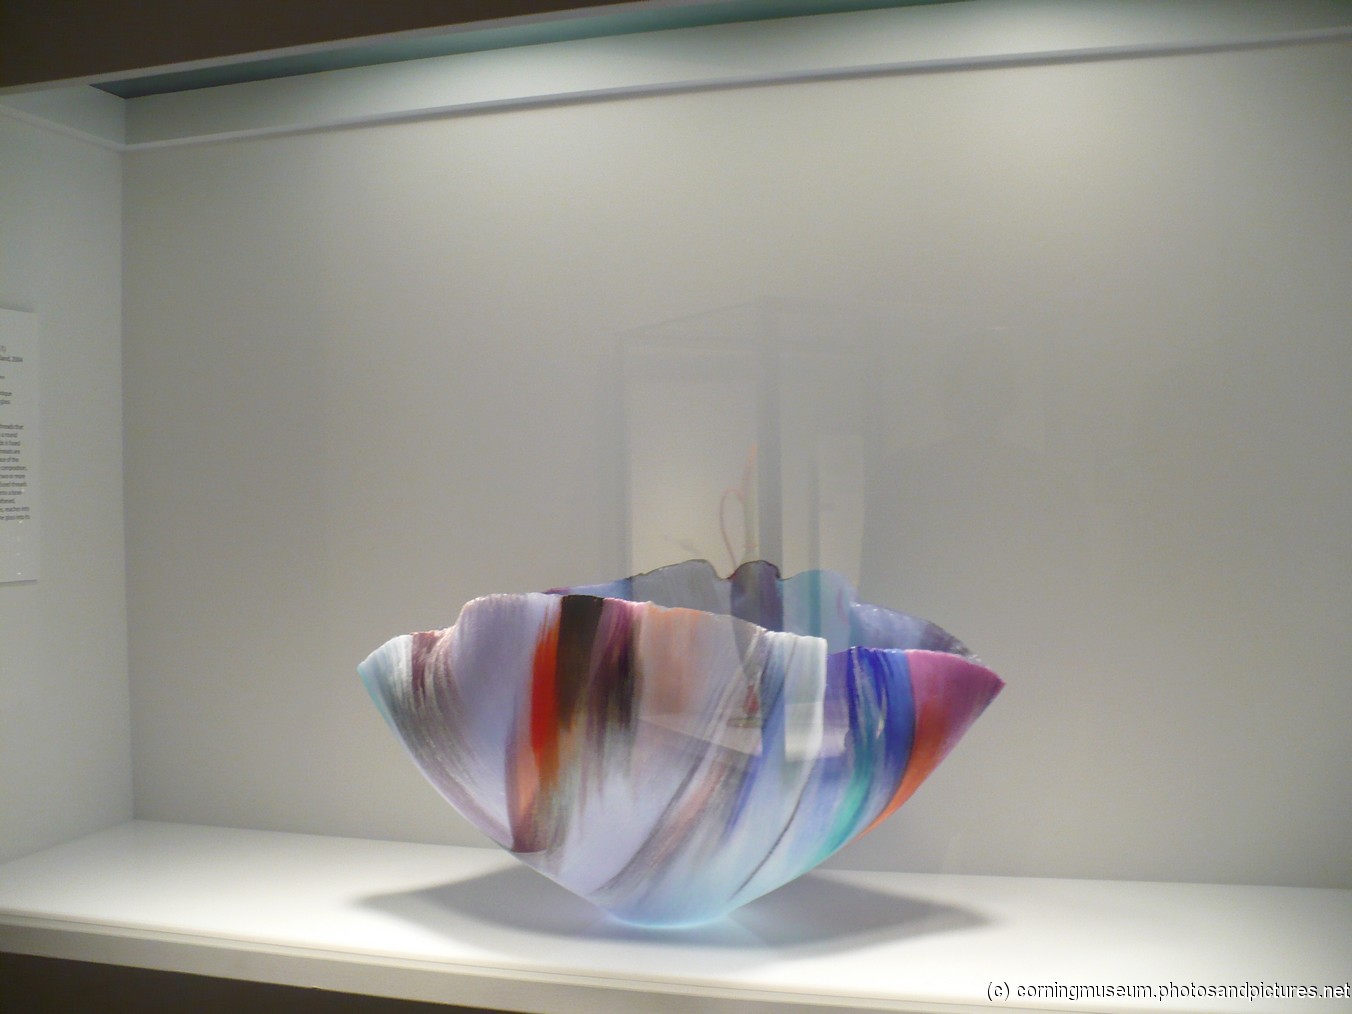 Colorful glass bowl art at Corning Museum of Glass.jpg
